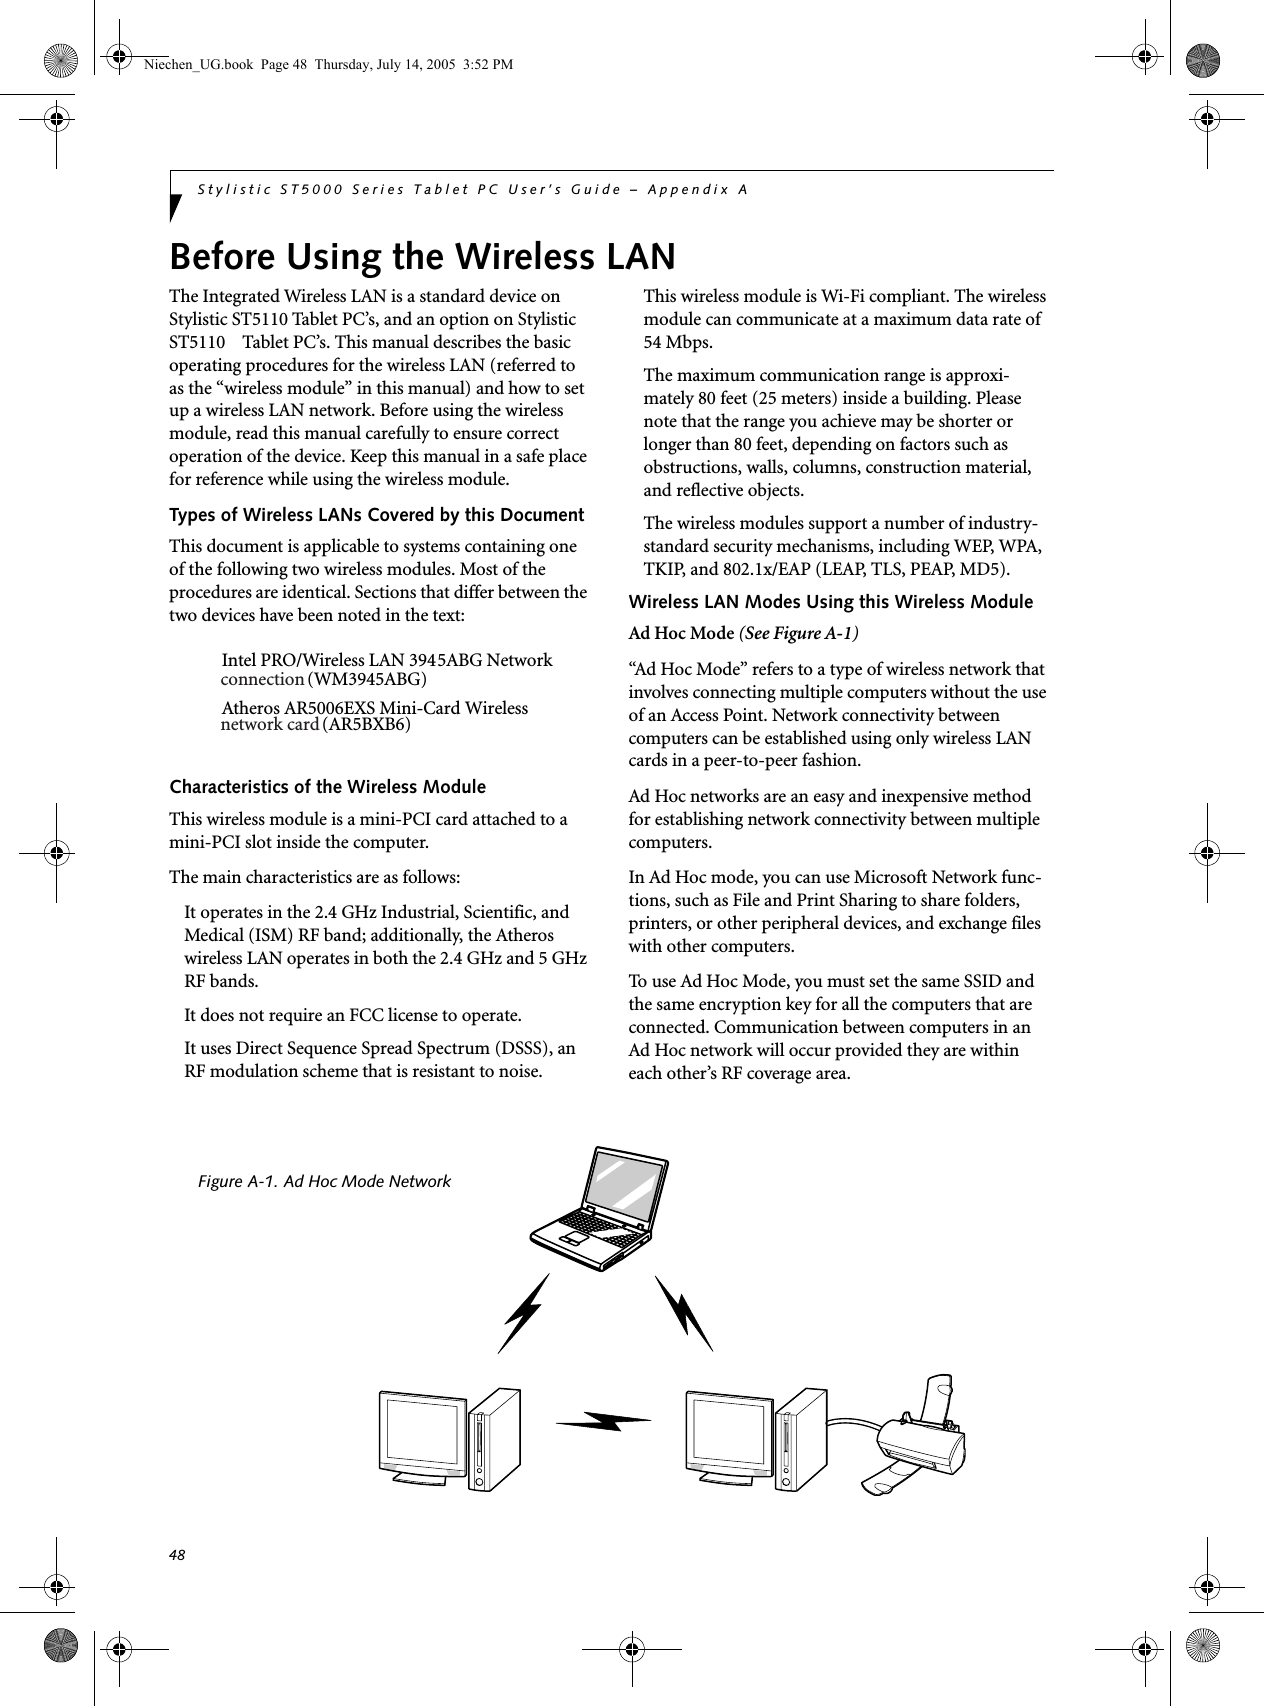 48Stylistic ST5000 Series Tablet PC User’s Guide – Appendix ABefore Using the Wireless LAN The Integrated Wireless LAN is a standard device on Stylistic ST5110 Tablet PC’s, and an option on Stylistic ST5110    Tablet PC’s. This manual describes the basic operating procedures for the wireless LAN (referred to as the “wireless module” in this manual) and how to set up a wireless LAN network. Before using the wireless module, read this manual carefully to ensure correct operation of the device. Keep this manual in a safe place for reference while using the wireless module.Types of Wireless LANs Covered by this DocumentThis document is applicable to systems containing one of the following two wireless modules. Most of the procedures are identical. Sections that differ between the two devices have been noted in the text:Intel PRO/Wireless LAN 3945ABG NetworkAtheros AR5006EXS Mini-Card WirelessCharacteristics of the Wireless ModuleThis wireless module is a mini-PCI card attached to a mini-PCI slot inside the computer.The main characteristics are as follows:It operates in the 2.4 GHz Industrial, Scientific, and Medical (ISM) RF band; additionally, the Atheros wireless LAN operates in both the 2.4 GHz and 5 GHz RF bands.It does not require an FCC license to operate.It uses Direct Sequence Spread Spectrum (DSSS), an RF modulation scheme that is resistant to noise.This wireless module is Wi-Fi compliant. The wireless module can communicate at a maximum data rate of 54 Mbps.The maximum communication range is approxi-mately 80 feet (25 meters) inside a building. Please note that the range you achieve may be shorter or longer than 80 feet, depending on factors such as obstructions, walls, columns, construction material, and reflective objects.The wireless modules support a number of industry-standard security mechanisms, including WEP, WPA, TKIP, and 802.1x/EAP (LEAP, TLS, PEAP, MD5).Wireless LAN Modes Using this Wireless ModuleAd Hoc Mode (See Figure A-1)“Ad Hoc Mode” refers to a type of wireless network that involves connecting multiple computers without the use of an Access Point. Network connectivity between computers can be established using only wireless LAN cards in a peer-to-peer fashion.Ad Hoc networks are an easy and inexpensive method for establishing network connectivity between multiple computers.In Ad Hoc mode, you can use Microsoft Network func-tions, such as File and Print Sharing to share folders, printers, or other peripheral devices, and exchange files with other computers.To use Ad Hoc Mode, you must set the same SSID and the same encryption key for all the computers that are connected. Communication between computers in an Ad Hoc network will occur provided they are within each other’s RF coverage area. Figure A-1. Ad Hoc Mode NetworkNiechen_UG.book  Page 48  Thursday, July 14, 2005  3:52 PMconnection network card (WM3945ABG)(AR5BXB6)